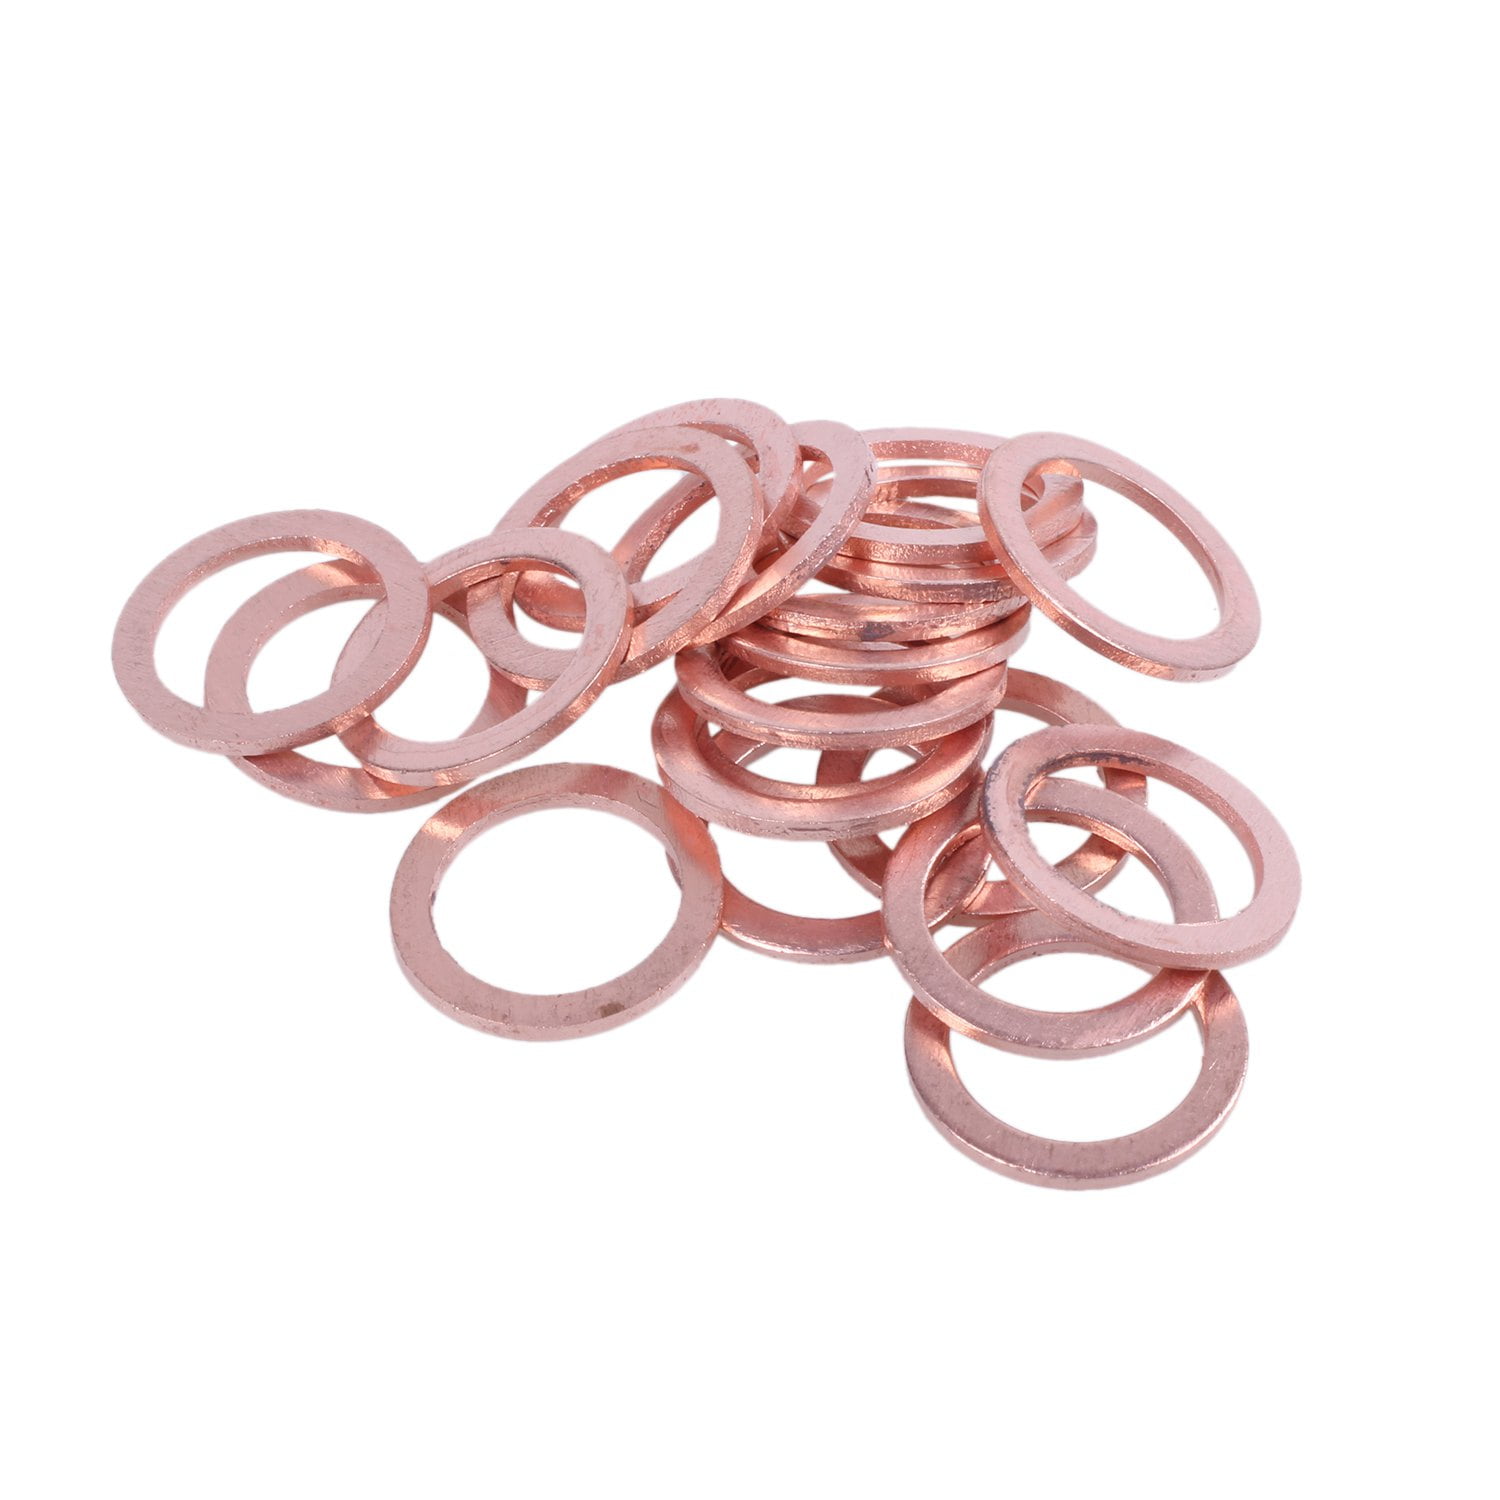 Pack of 50 Copper Washers 10mm x 14mm x 1mm 